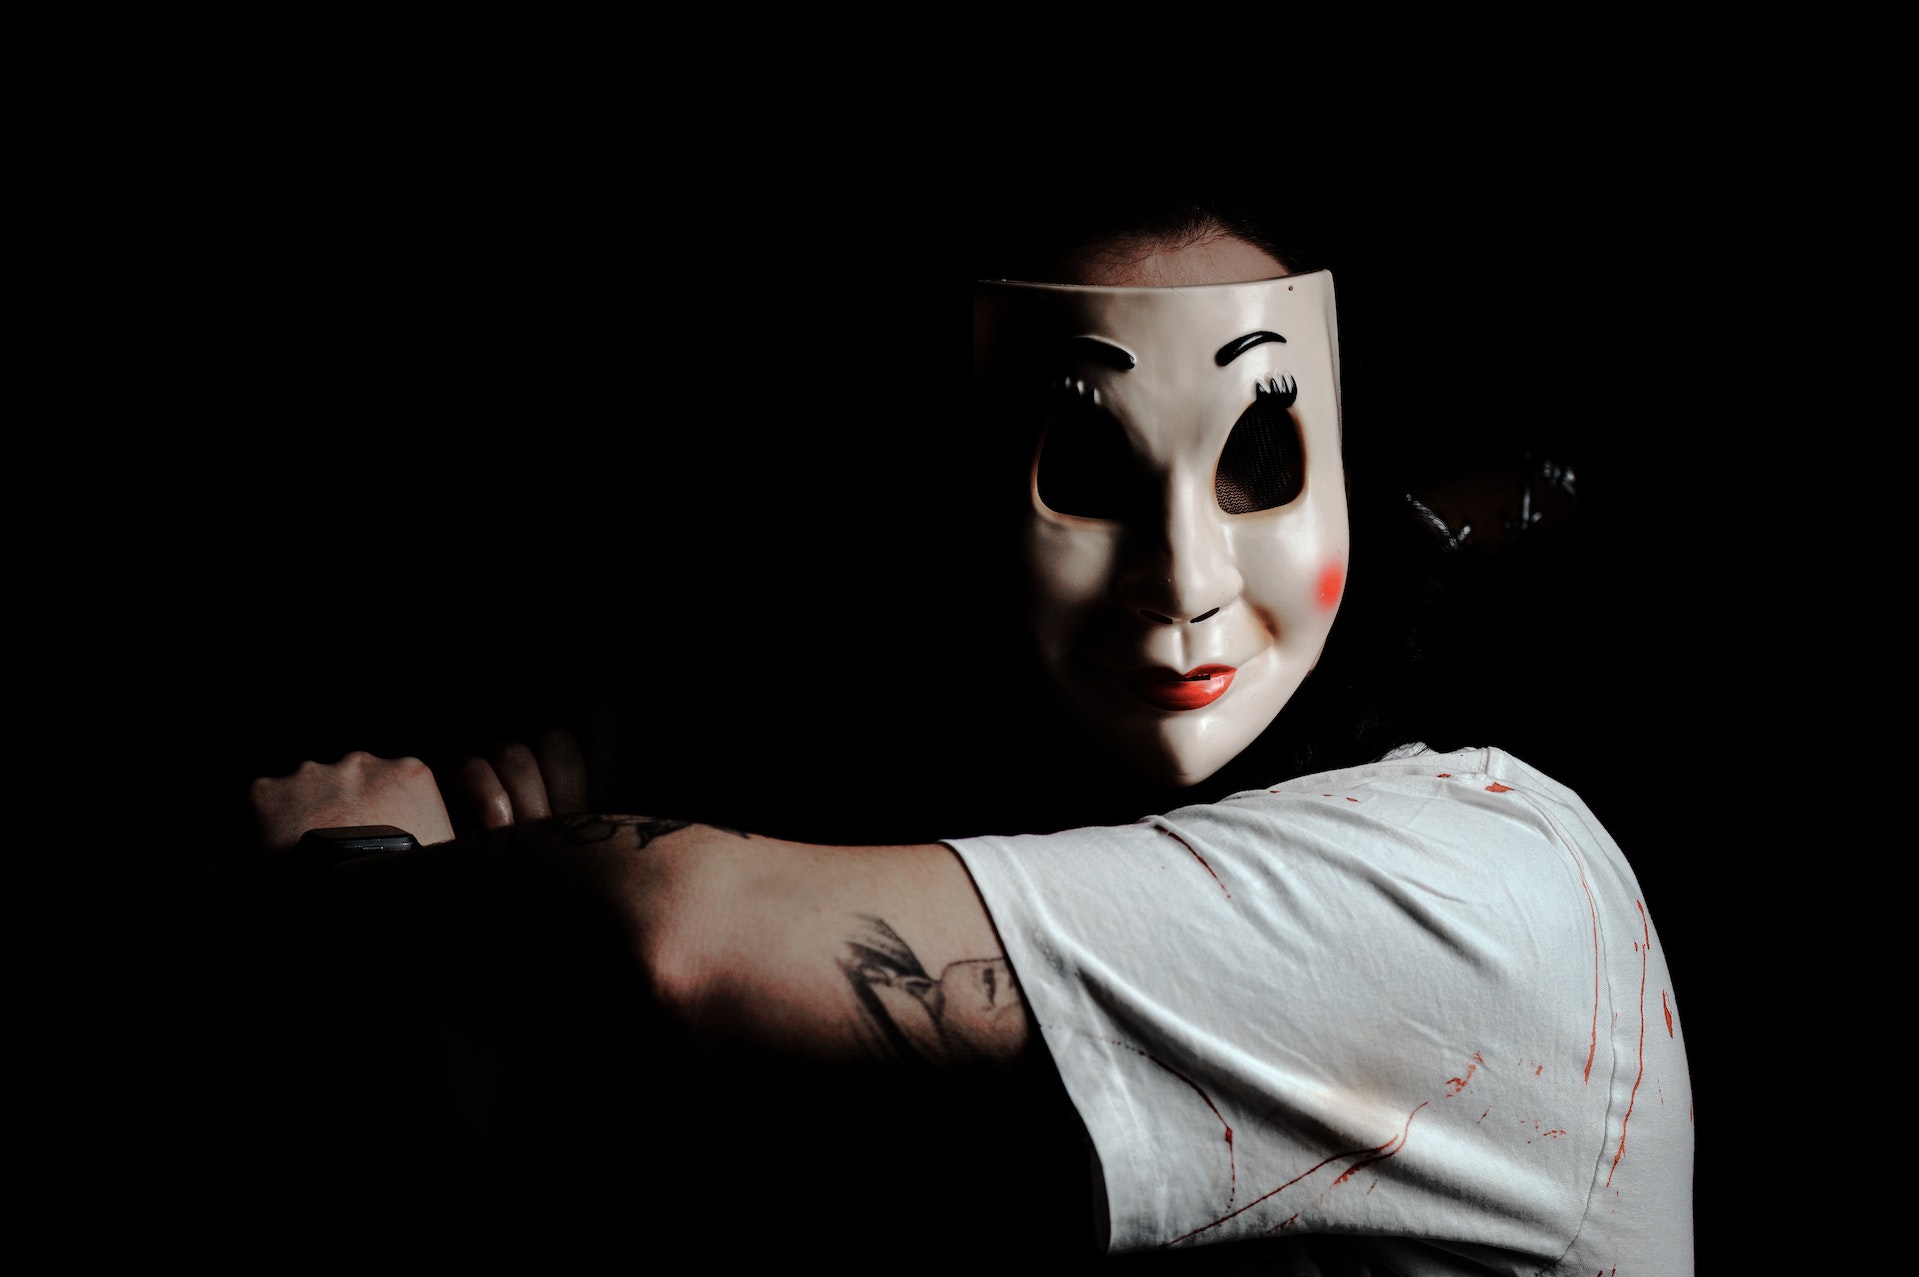 Your background check: 4 scary stories on why it matters